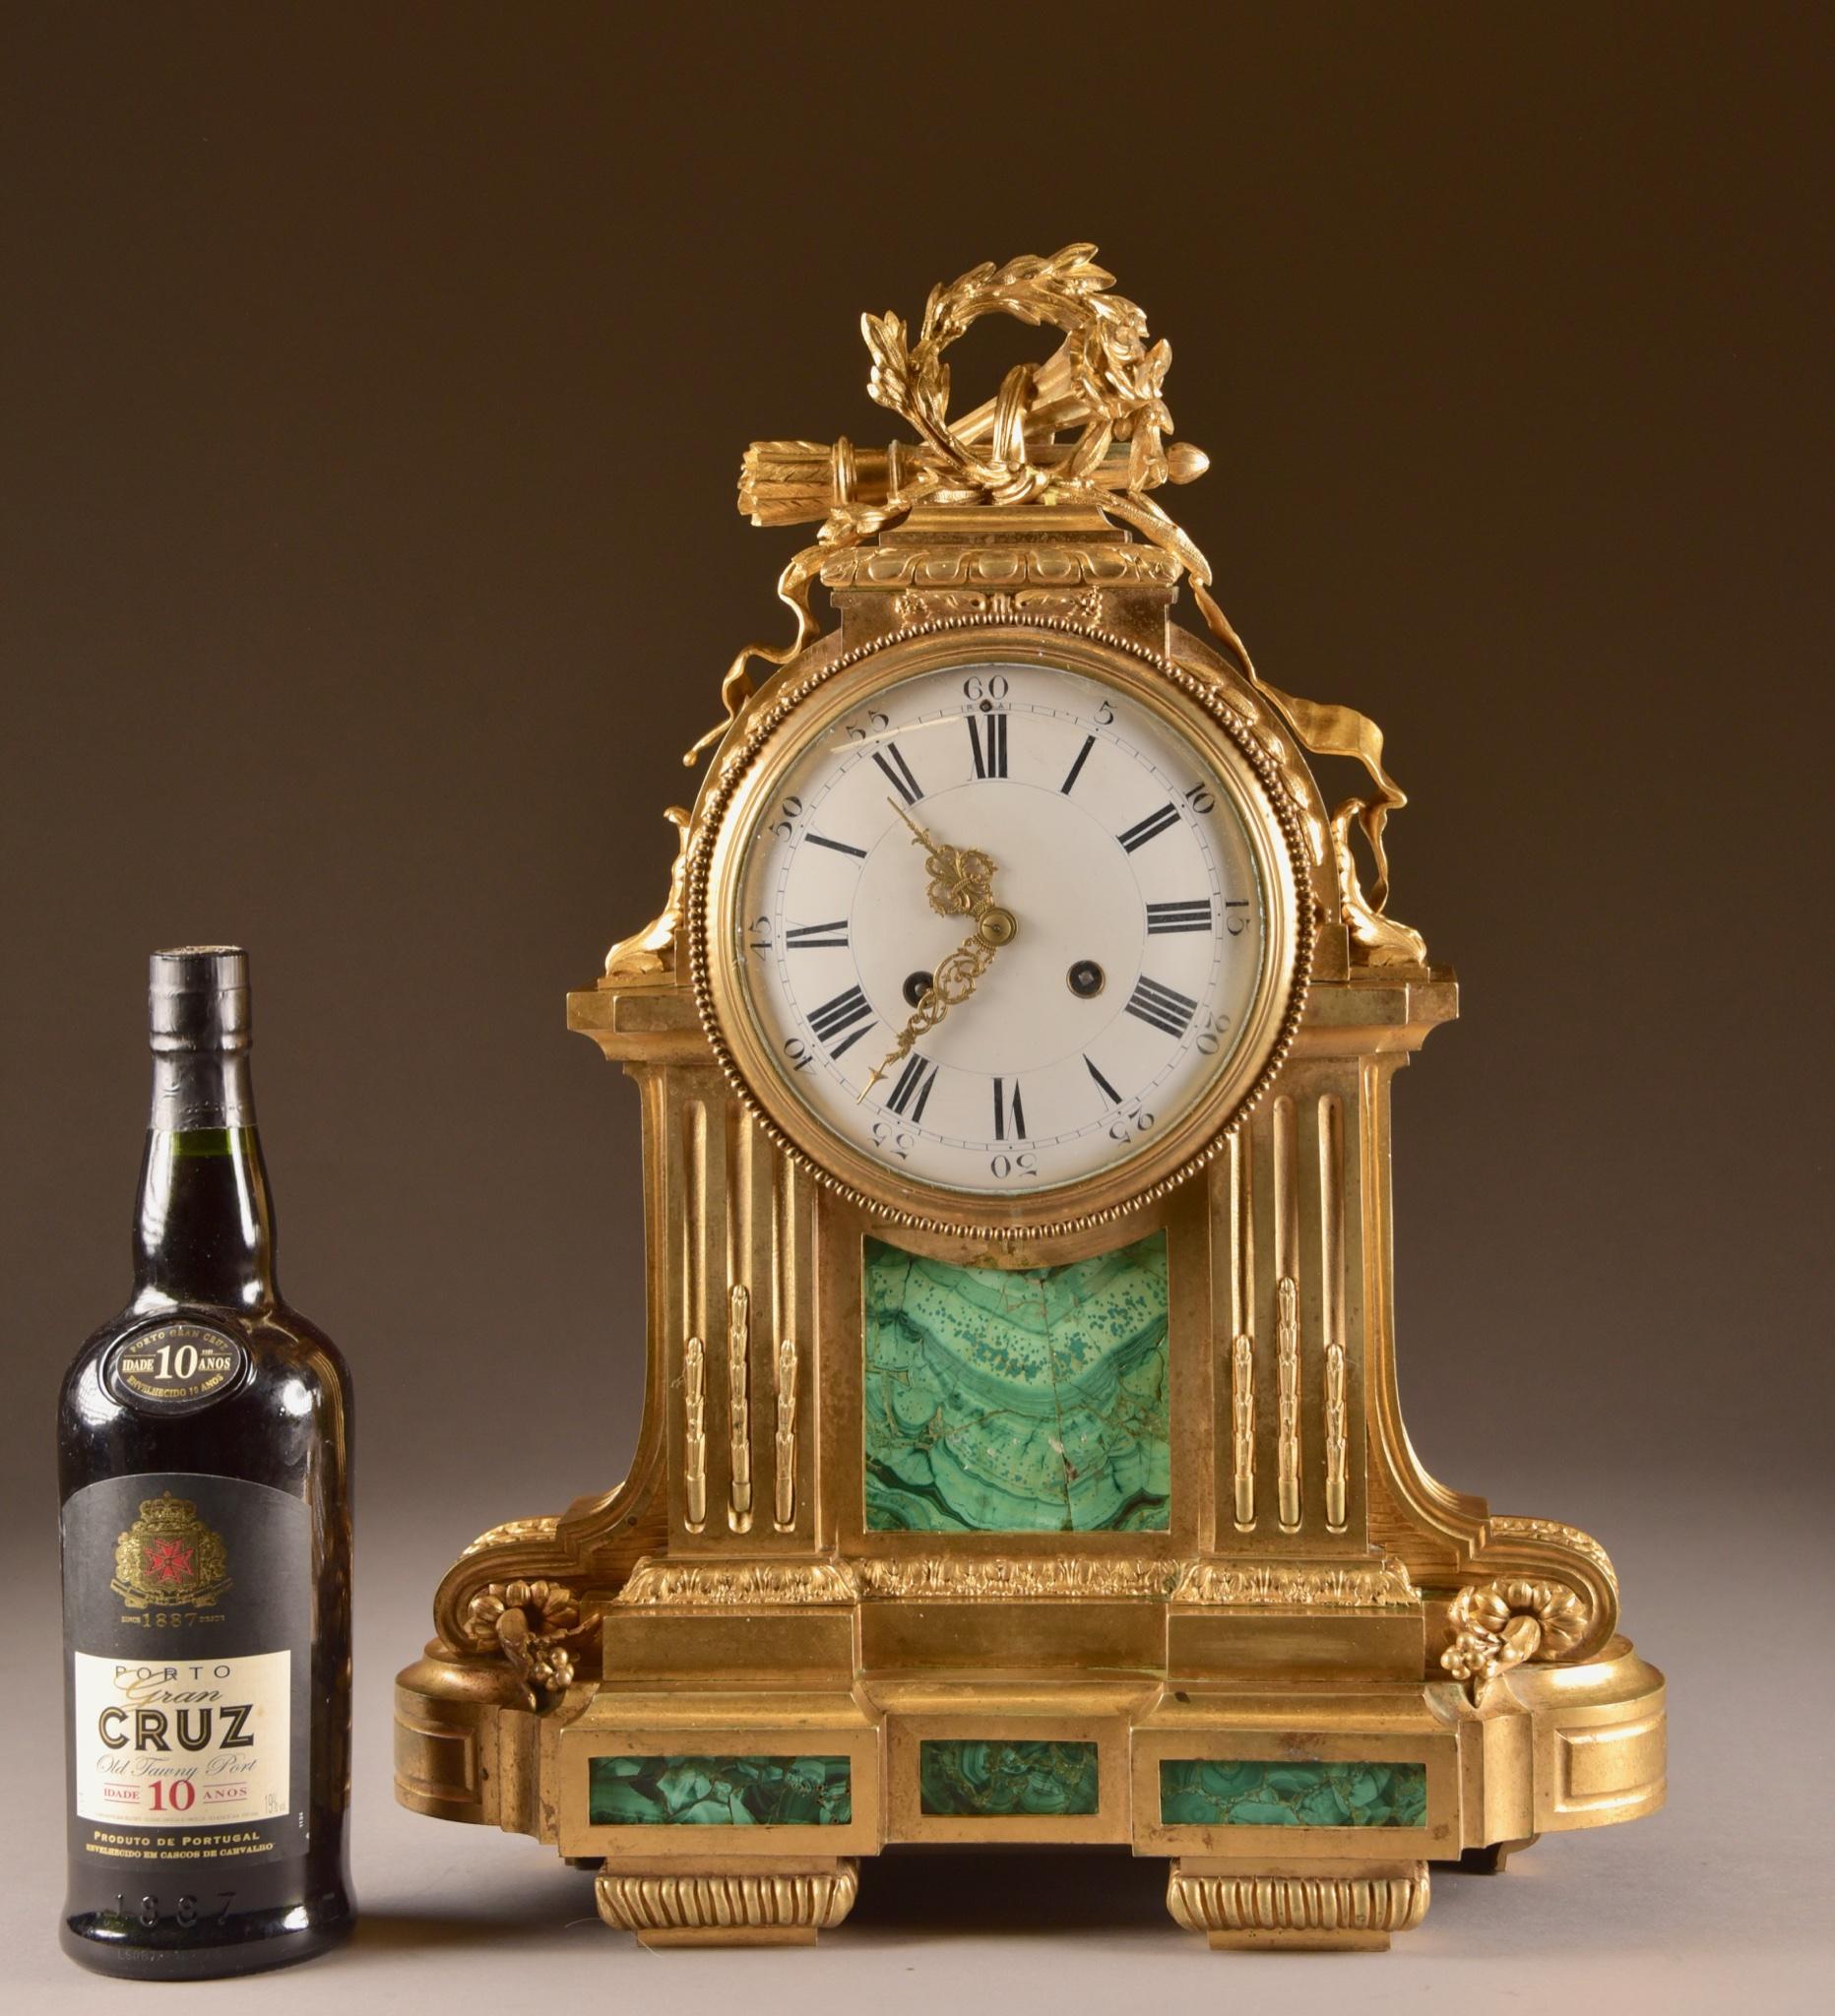 A large 18th-early 19th century French fire gilt bronze with malachite pendulum in neoclassical style. Awarded with a torch, quiver and wreath and enamel dial.

This clock comes with a key and a pendulum. Clockwork has recently been checked and